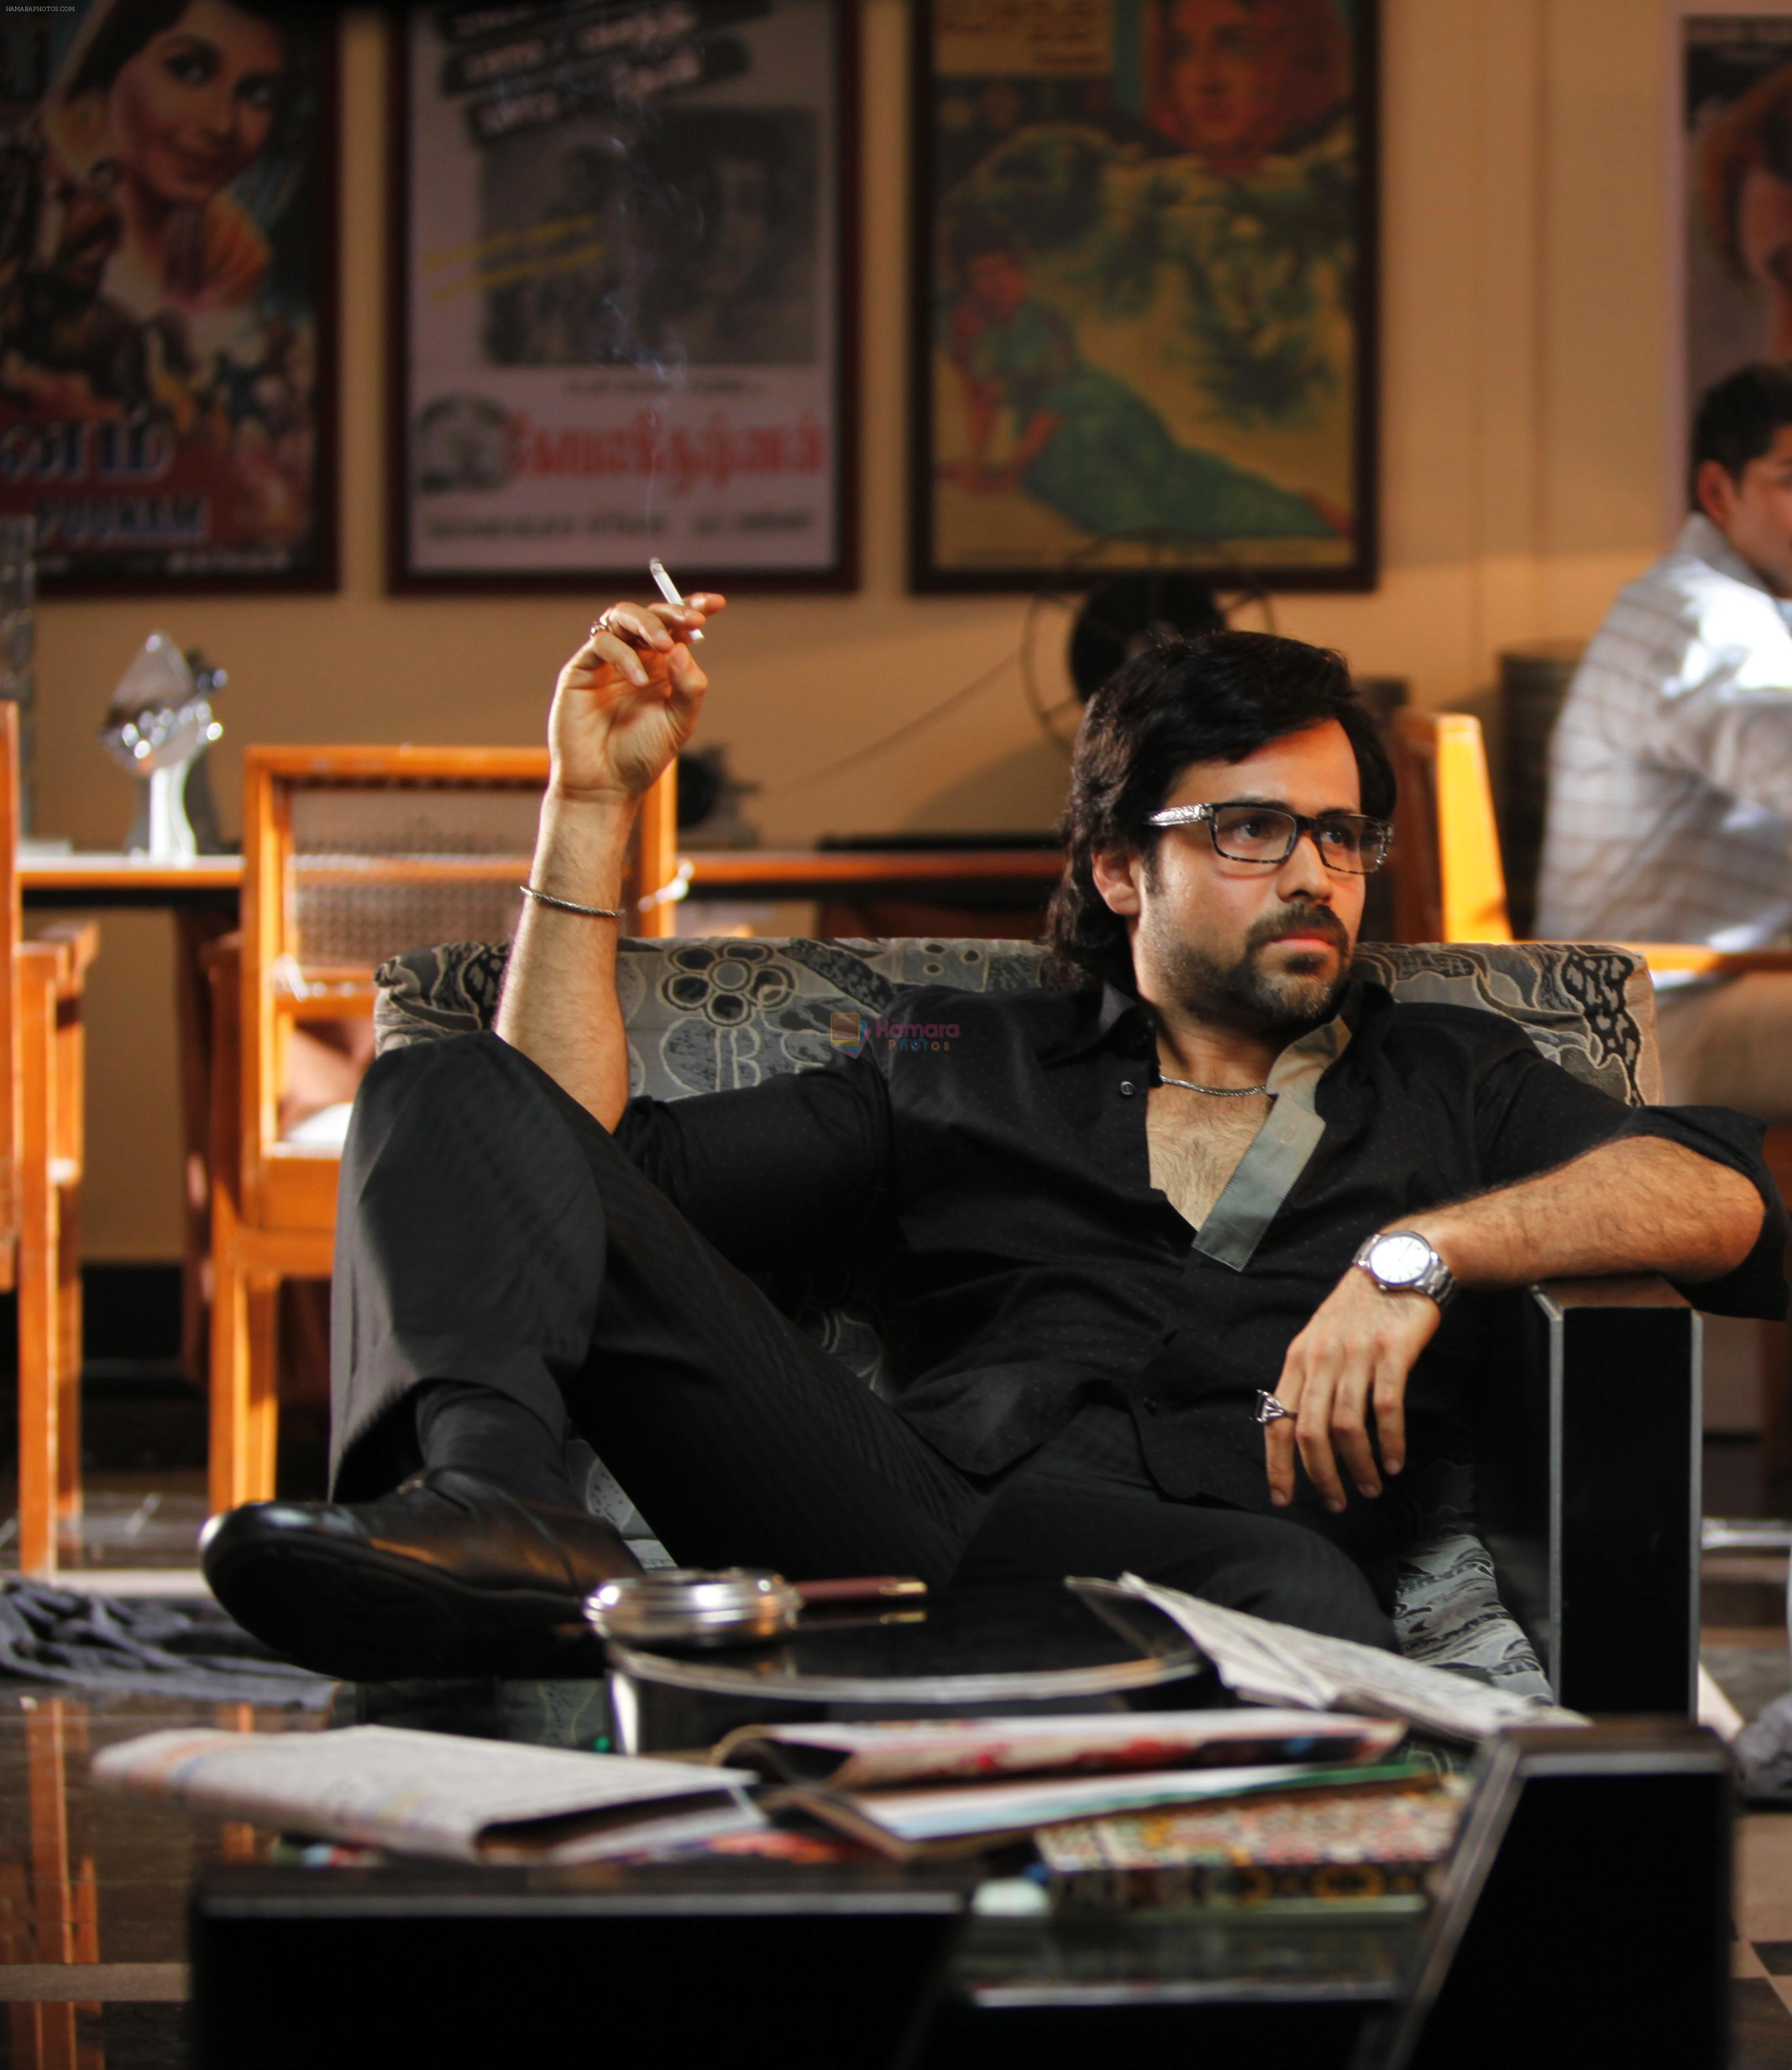 Emraan Hashmi in the still from movie The Dirty Picture